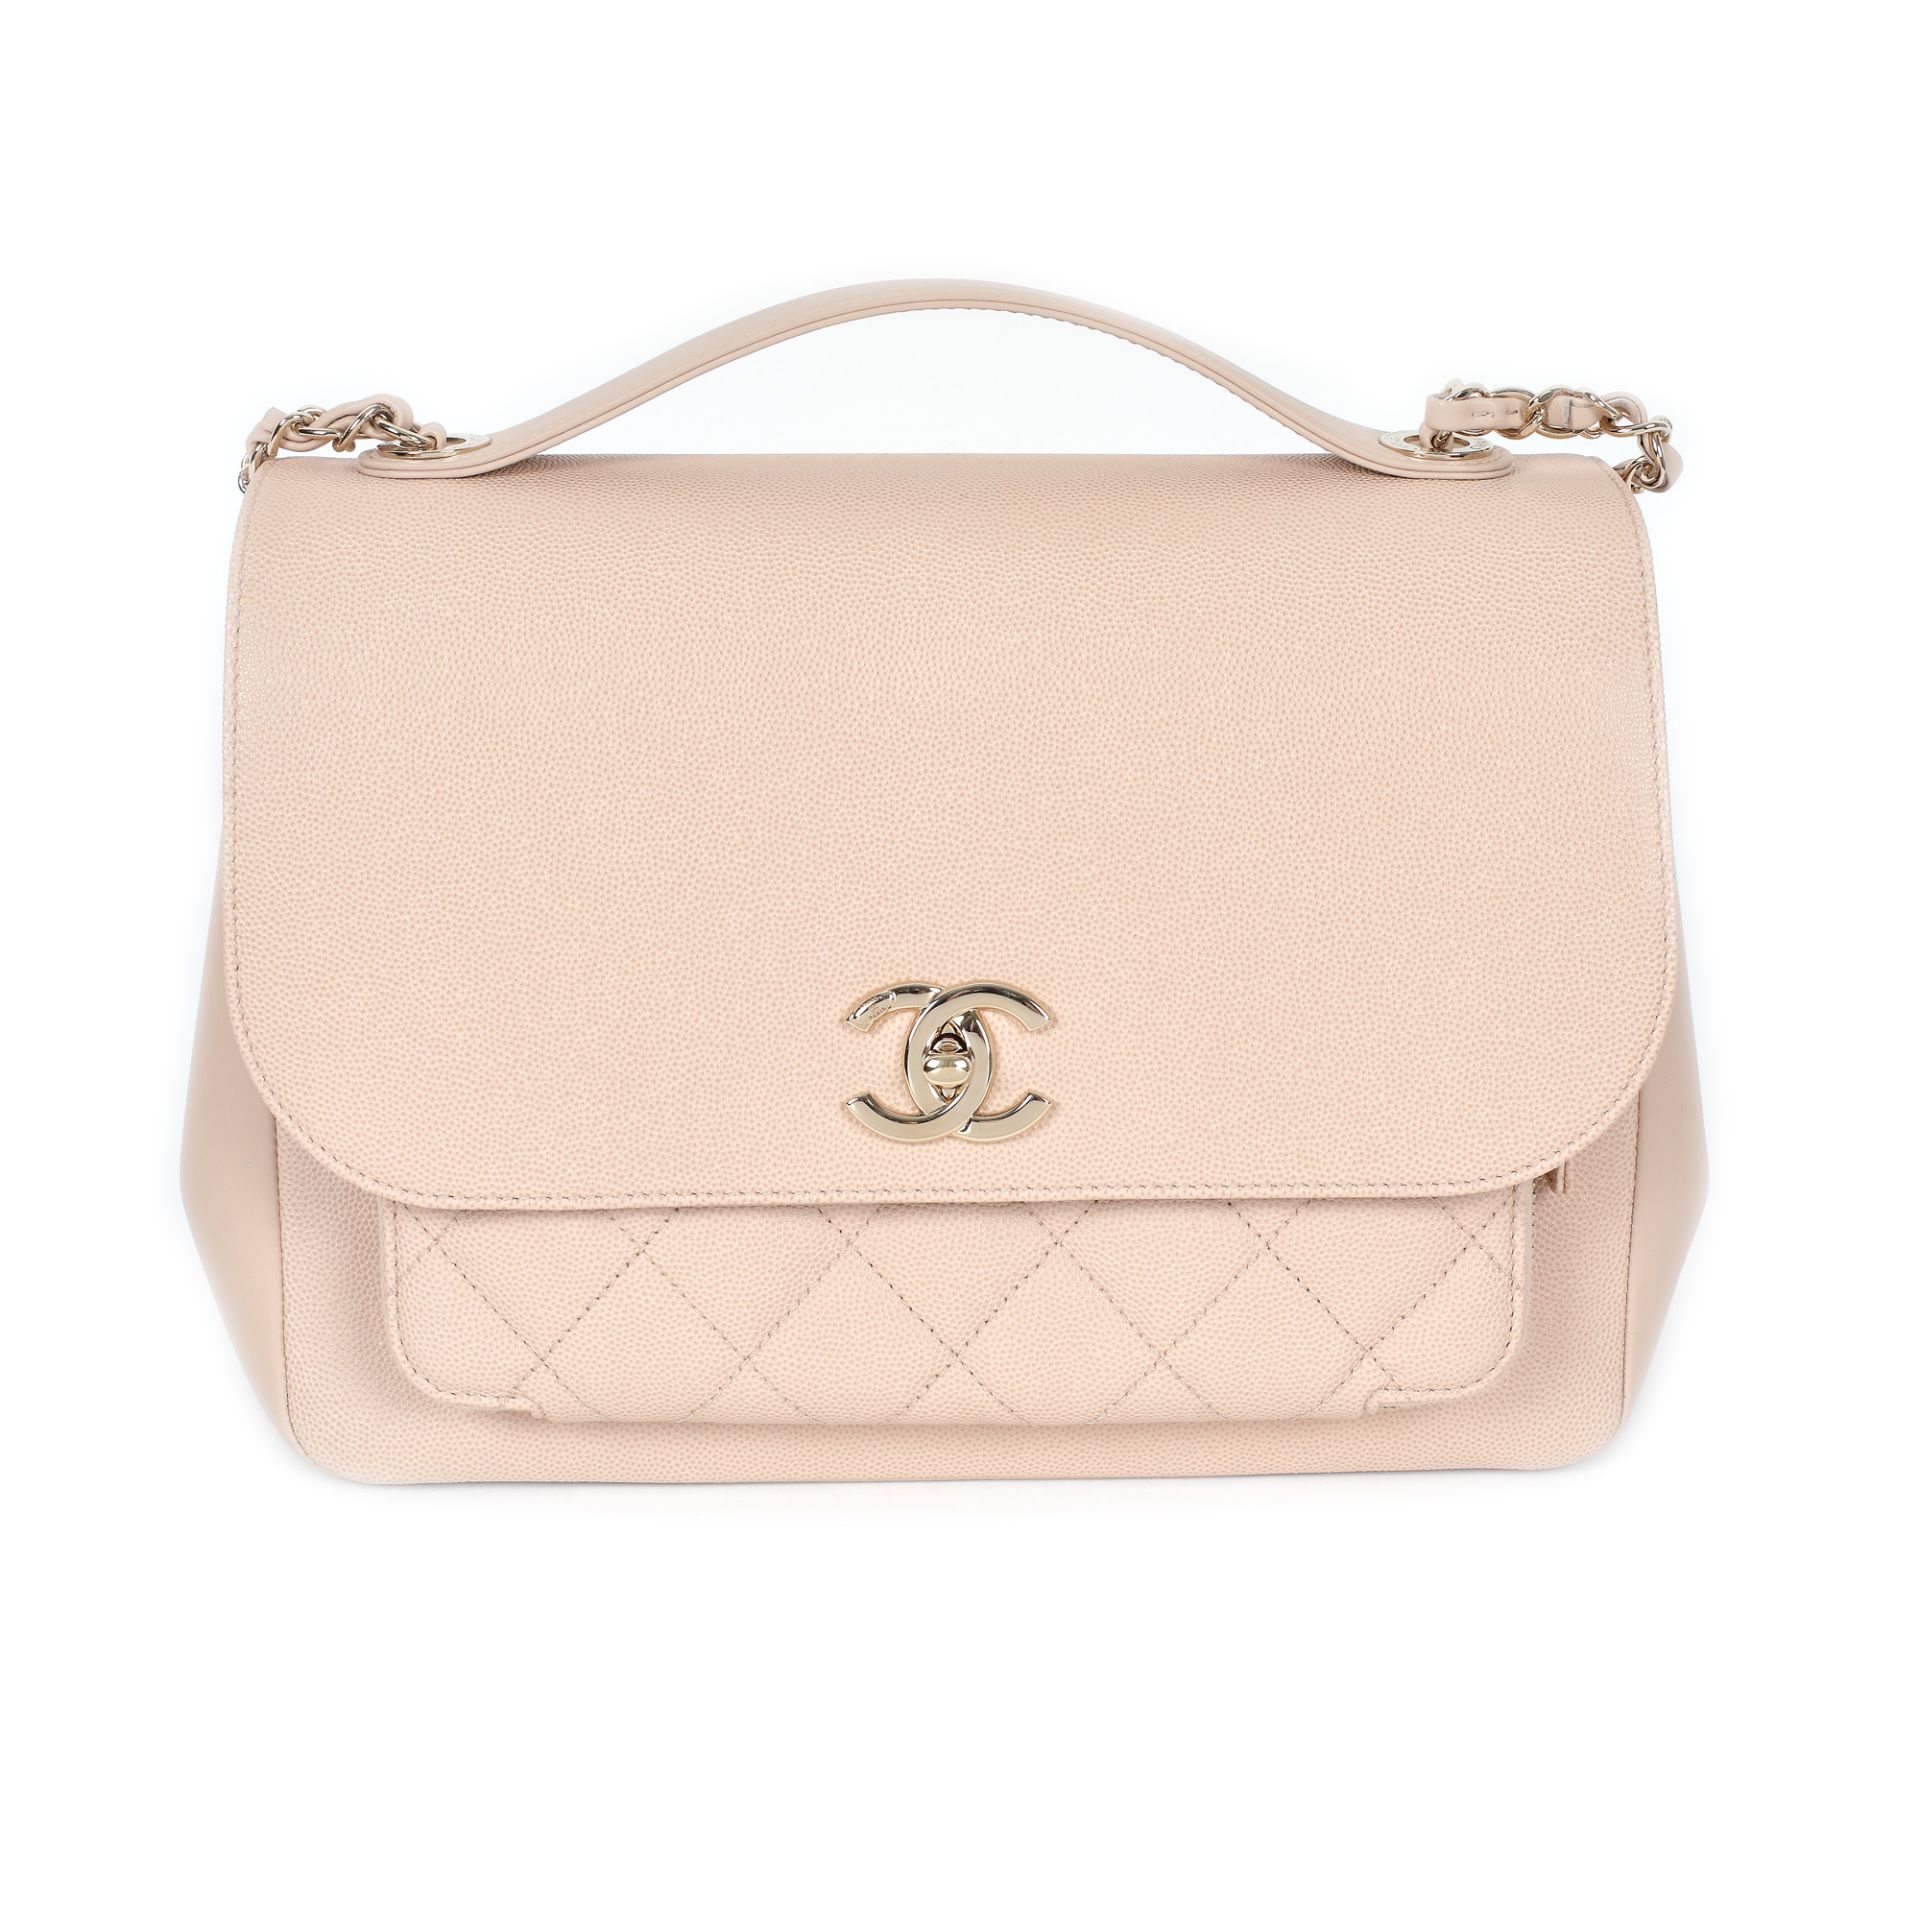 "Business Affinity Flap Bag" - Chanel bag, partially quilted Caviar leather, beige